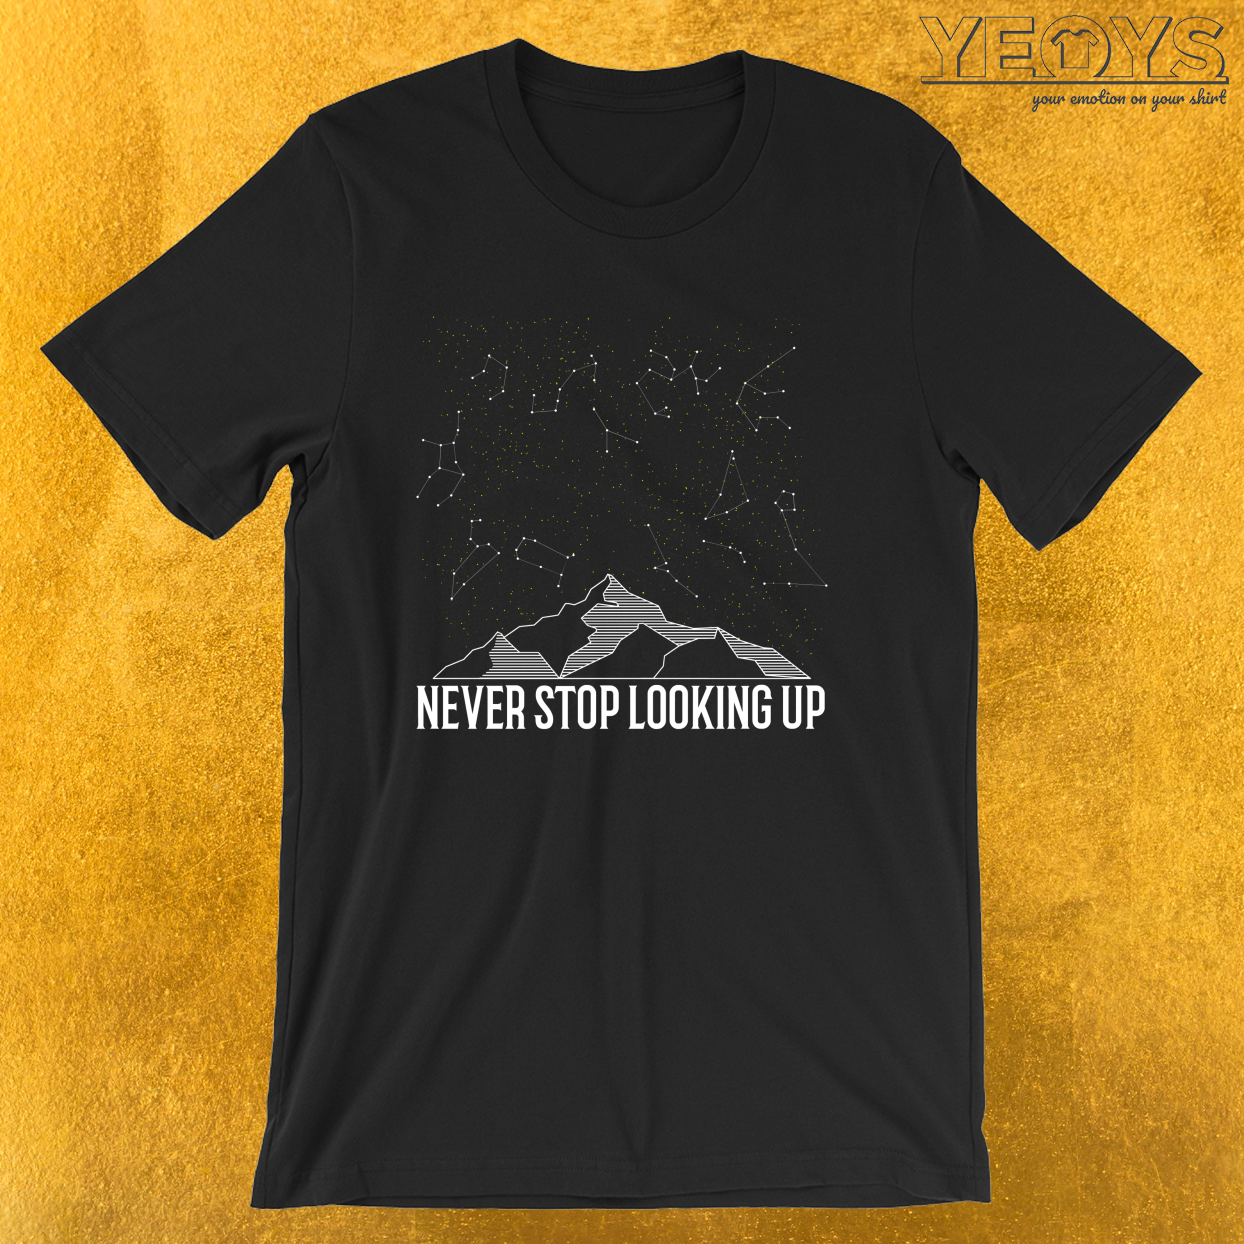 Cosmos Constellation Quote – Never Stop Looking Up Tee